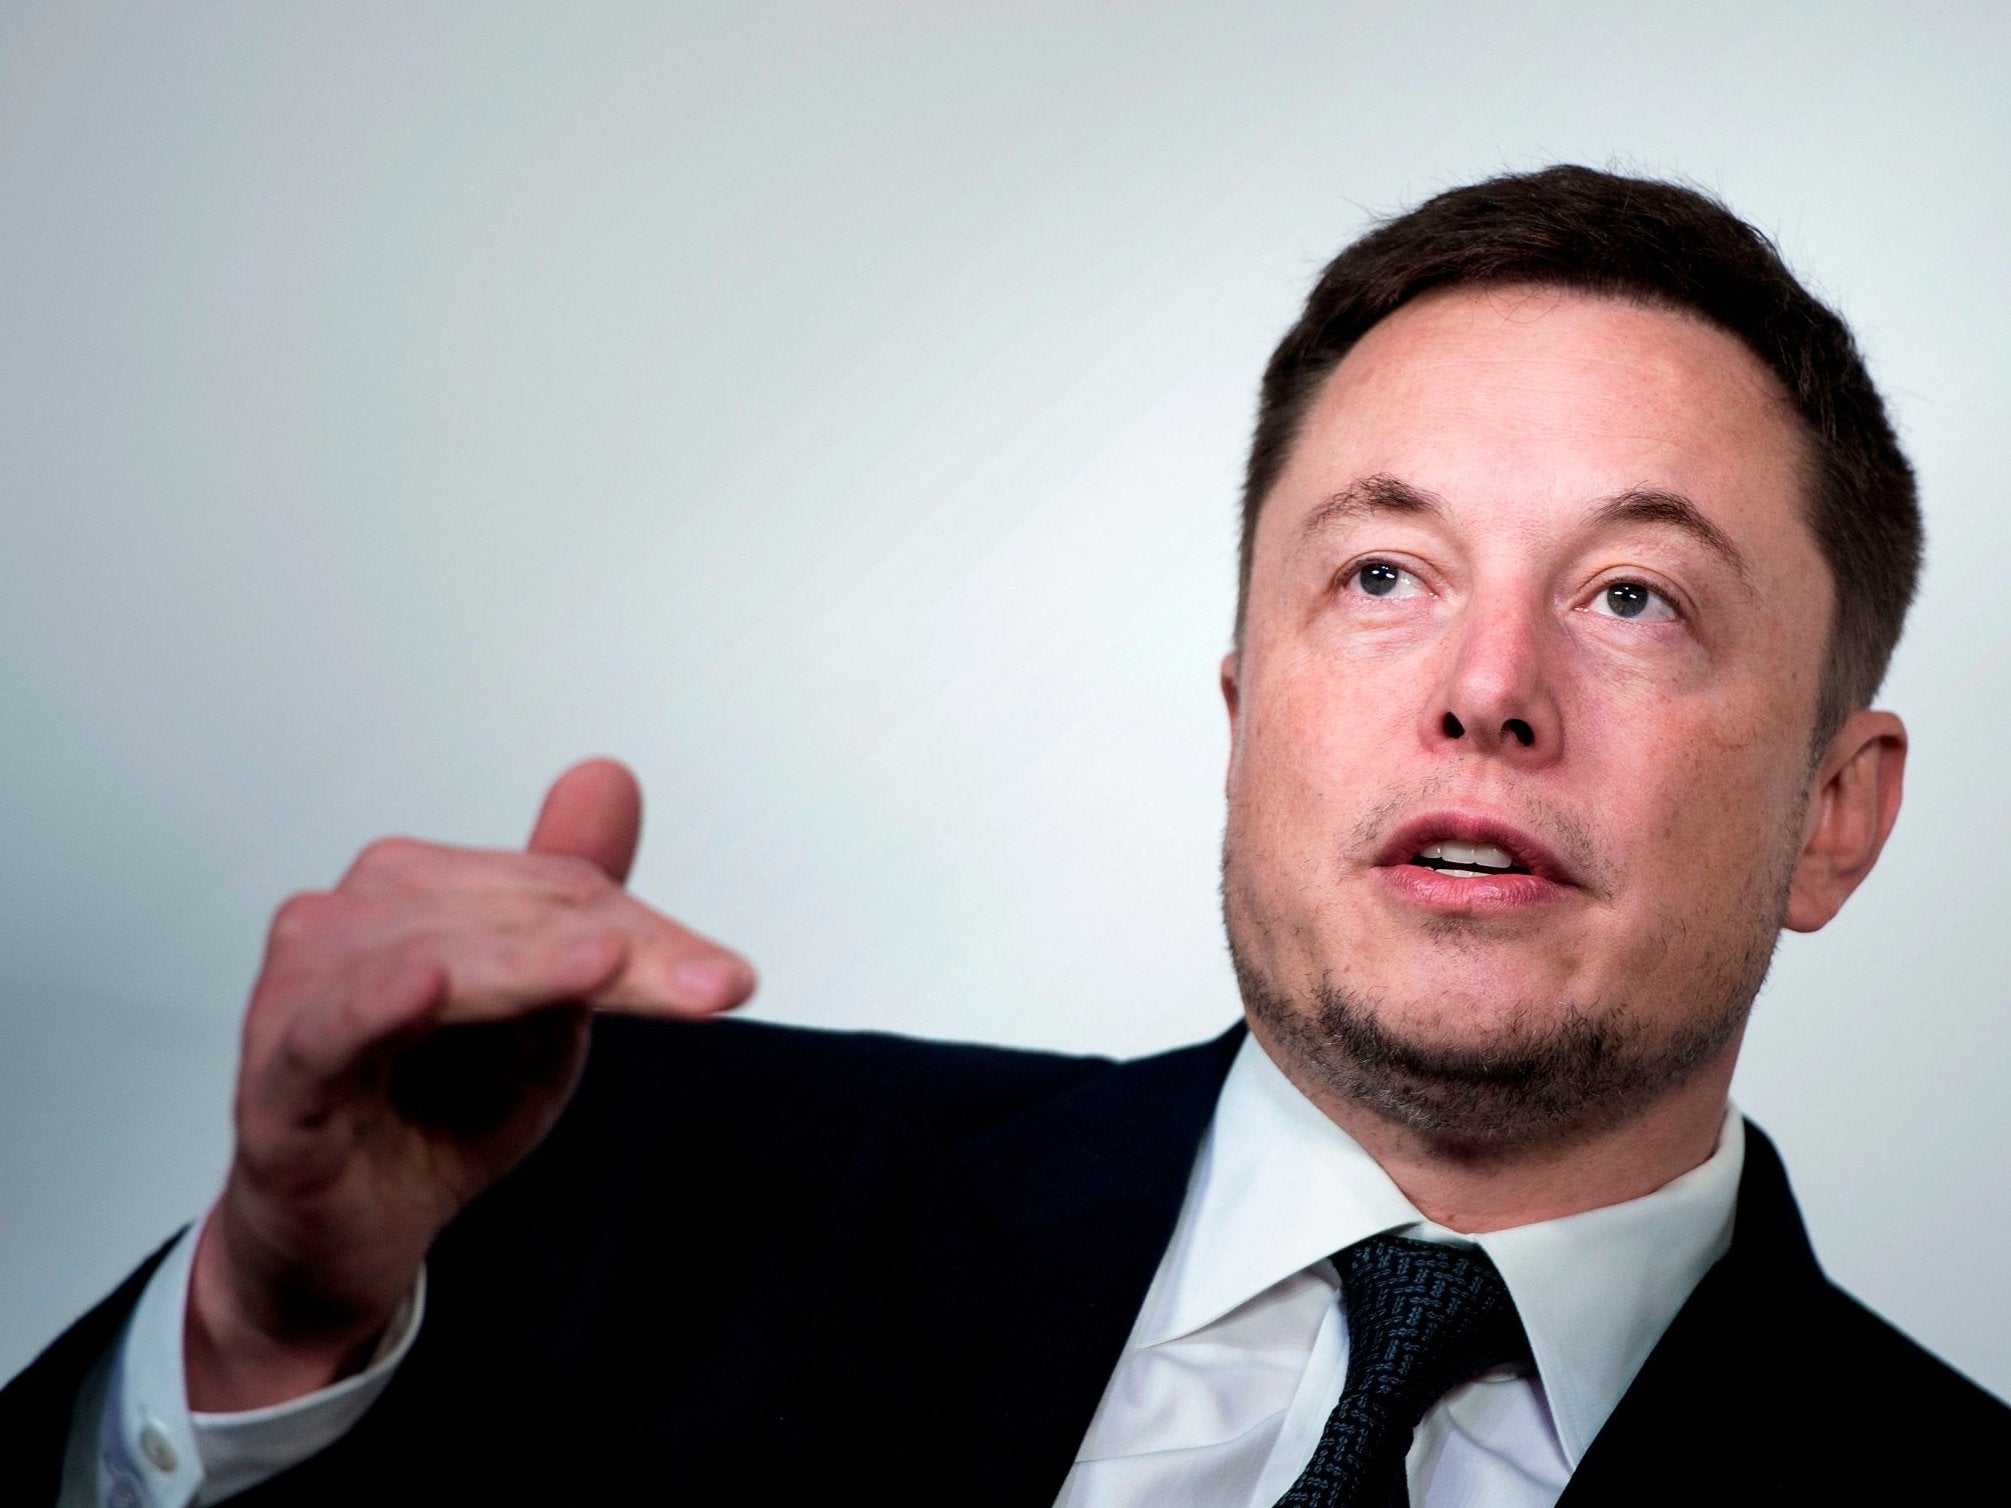 Tesla boss Elon Musk: Some investors think a chairman should be hired at Tesla to exercise oversight